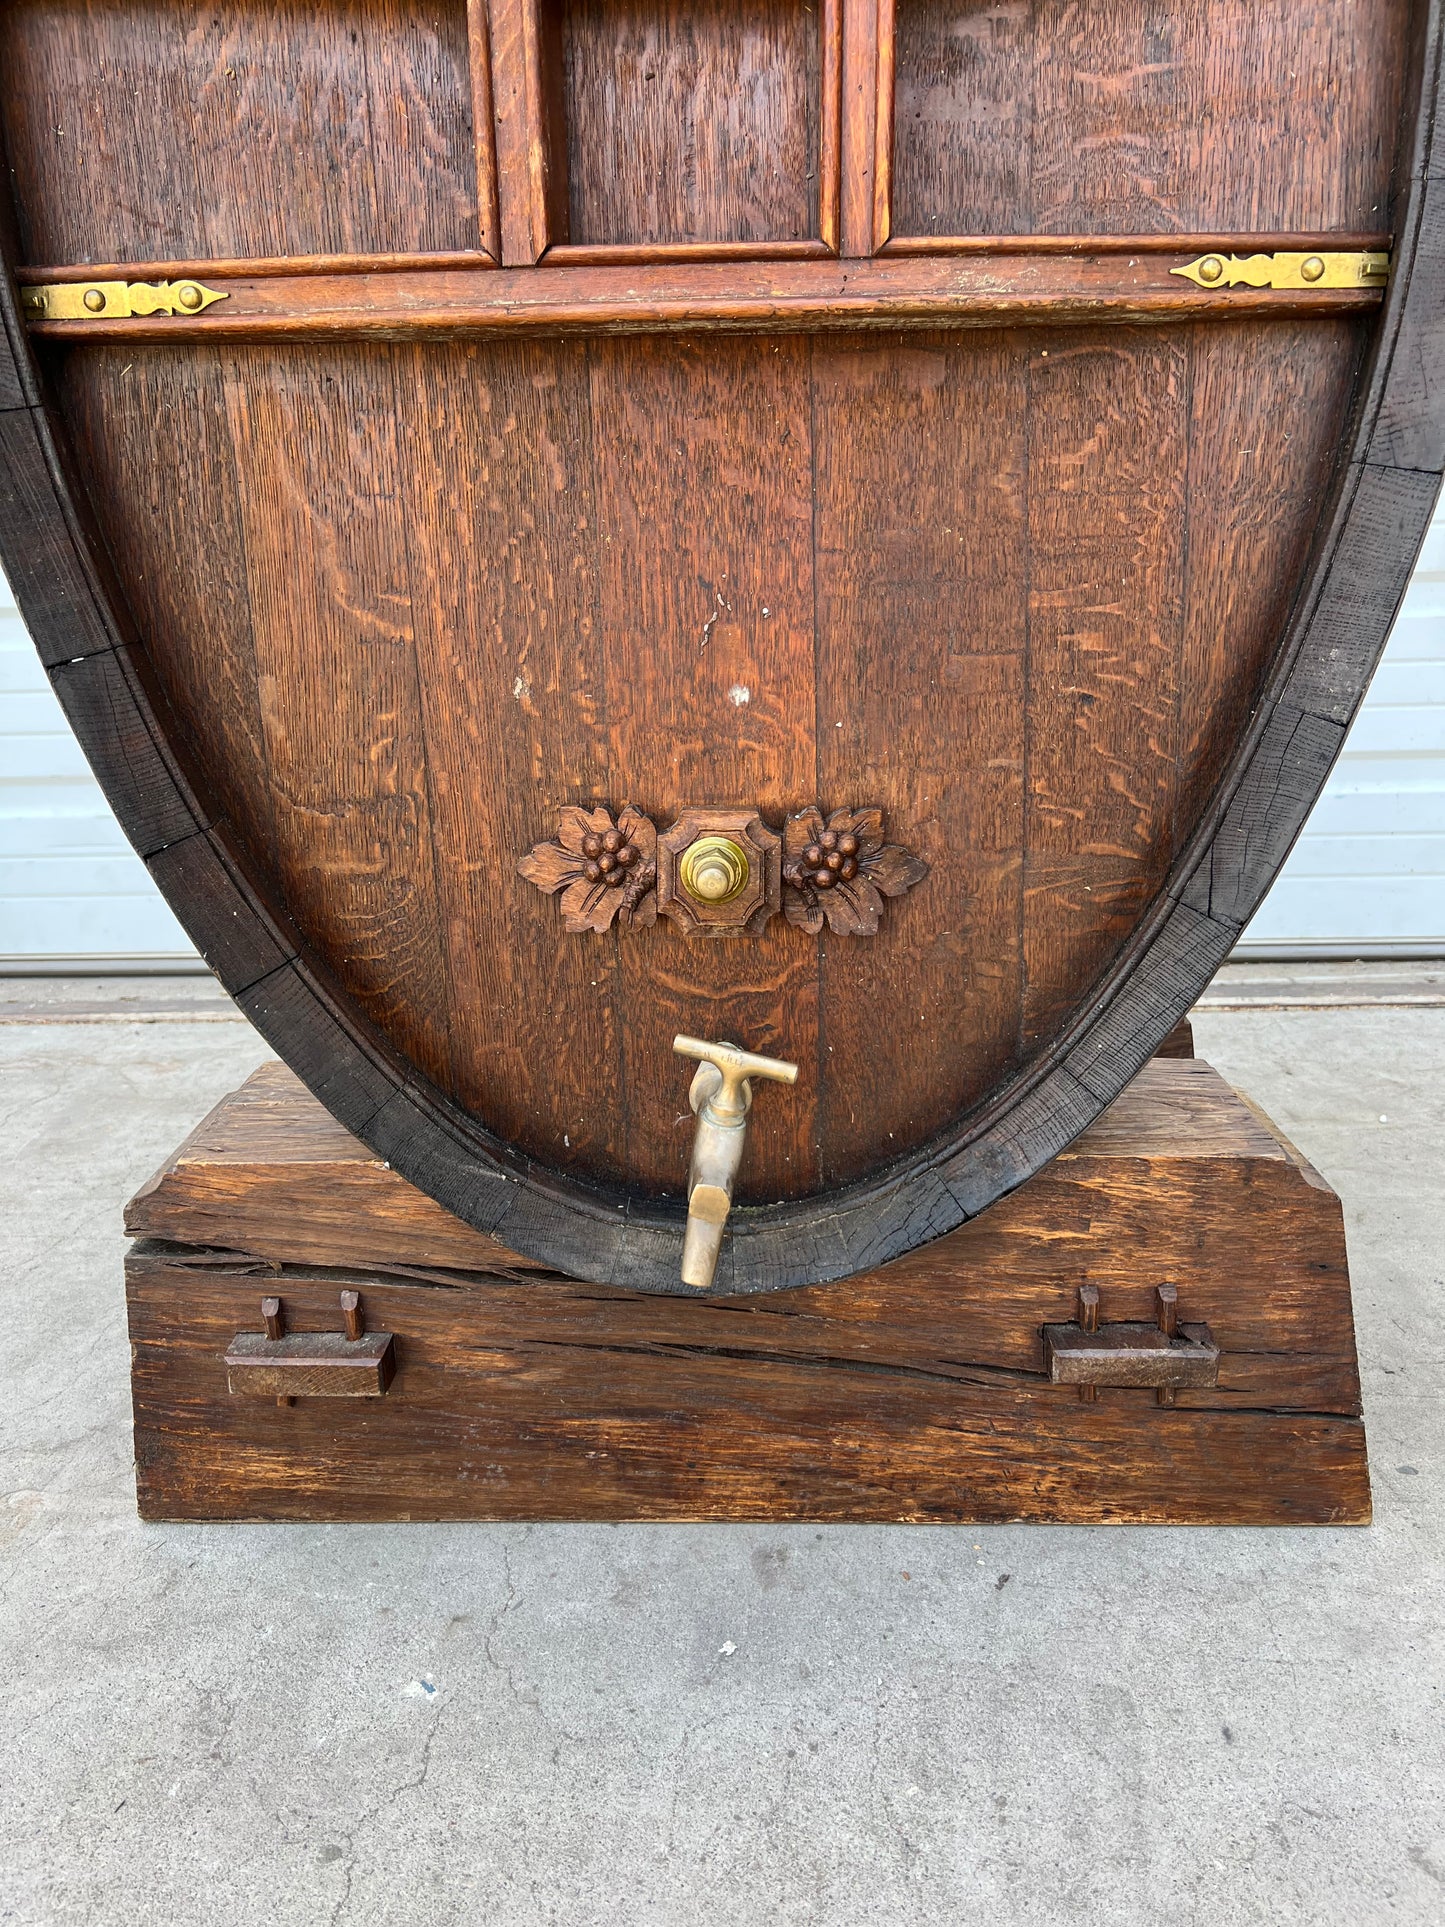 French Pierre Lanoix Wine Barrel on Stand